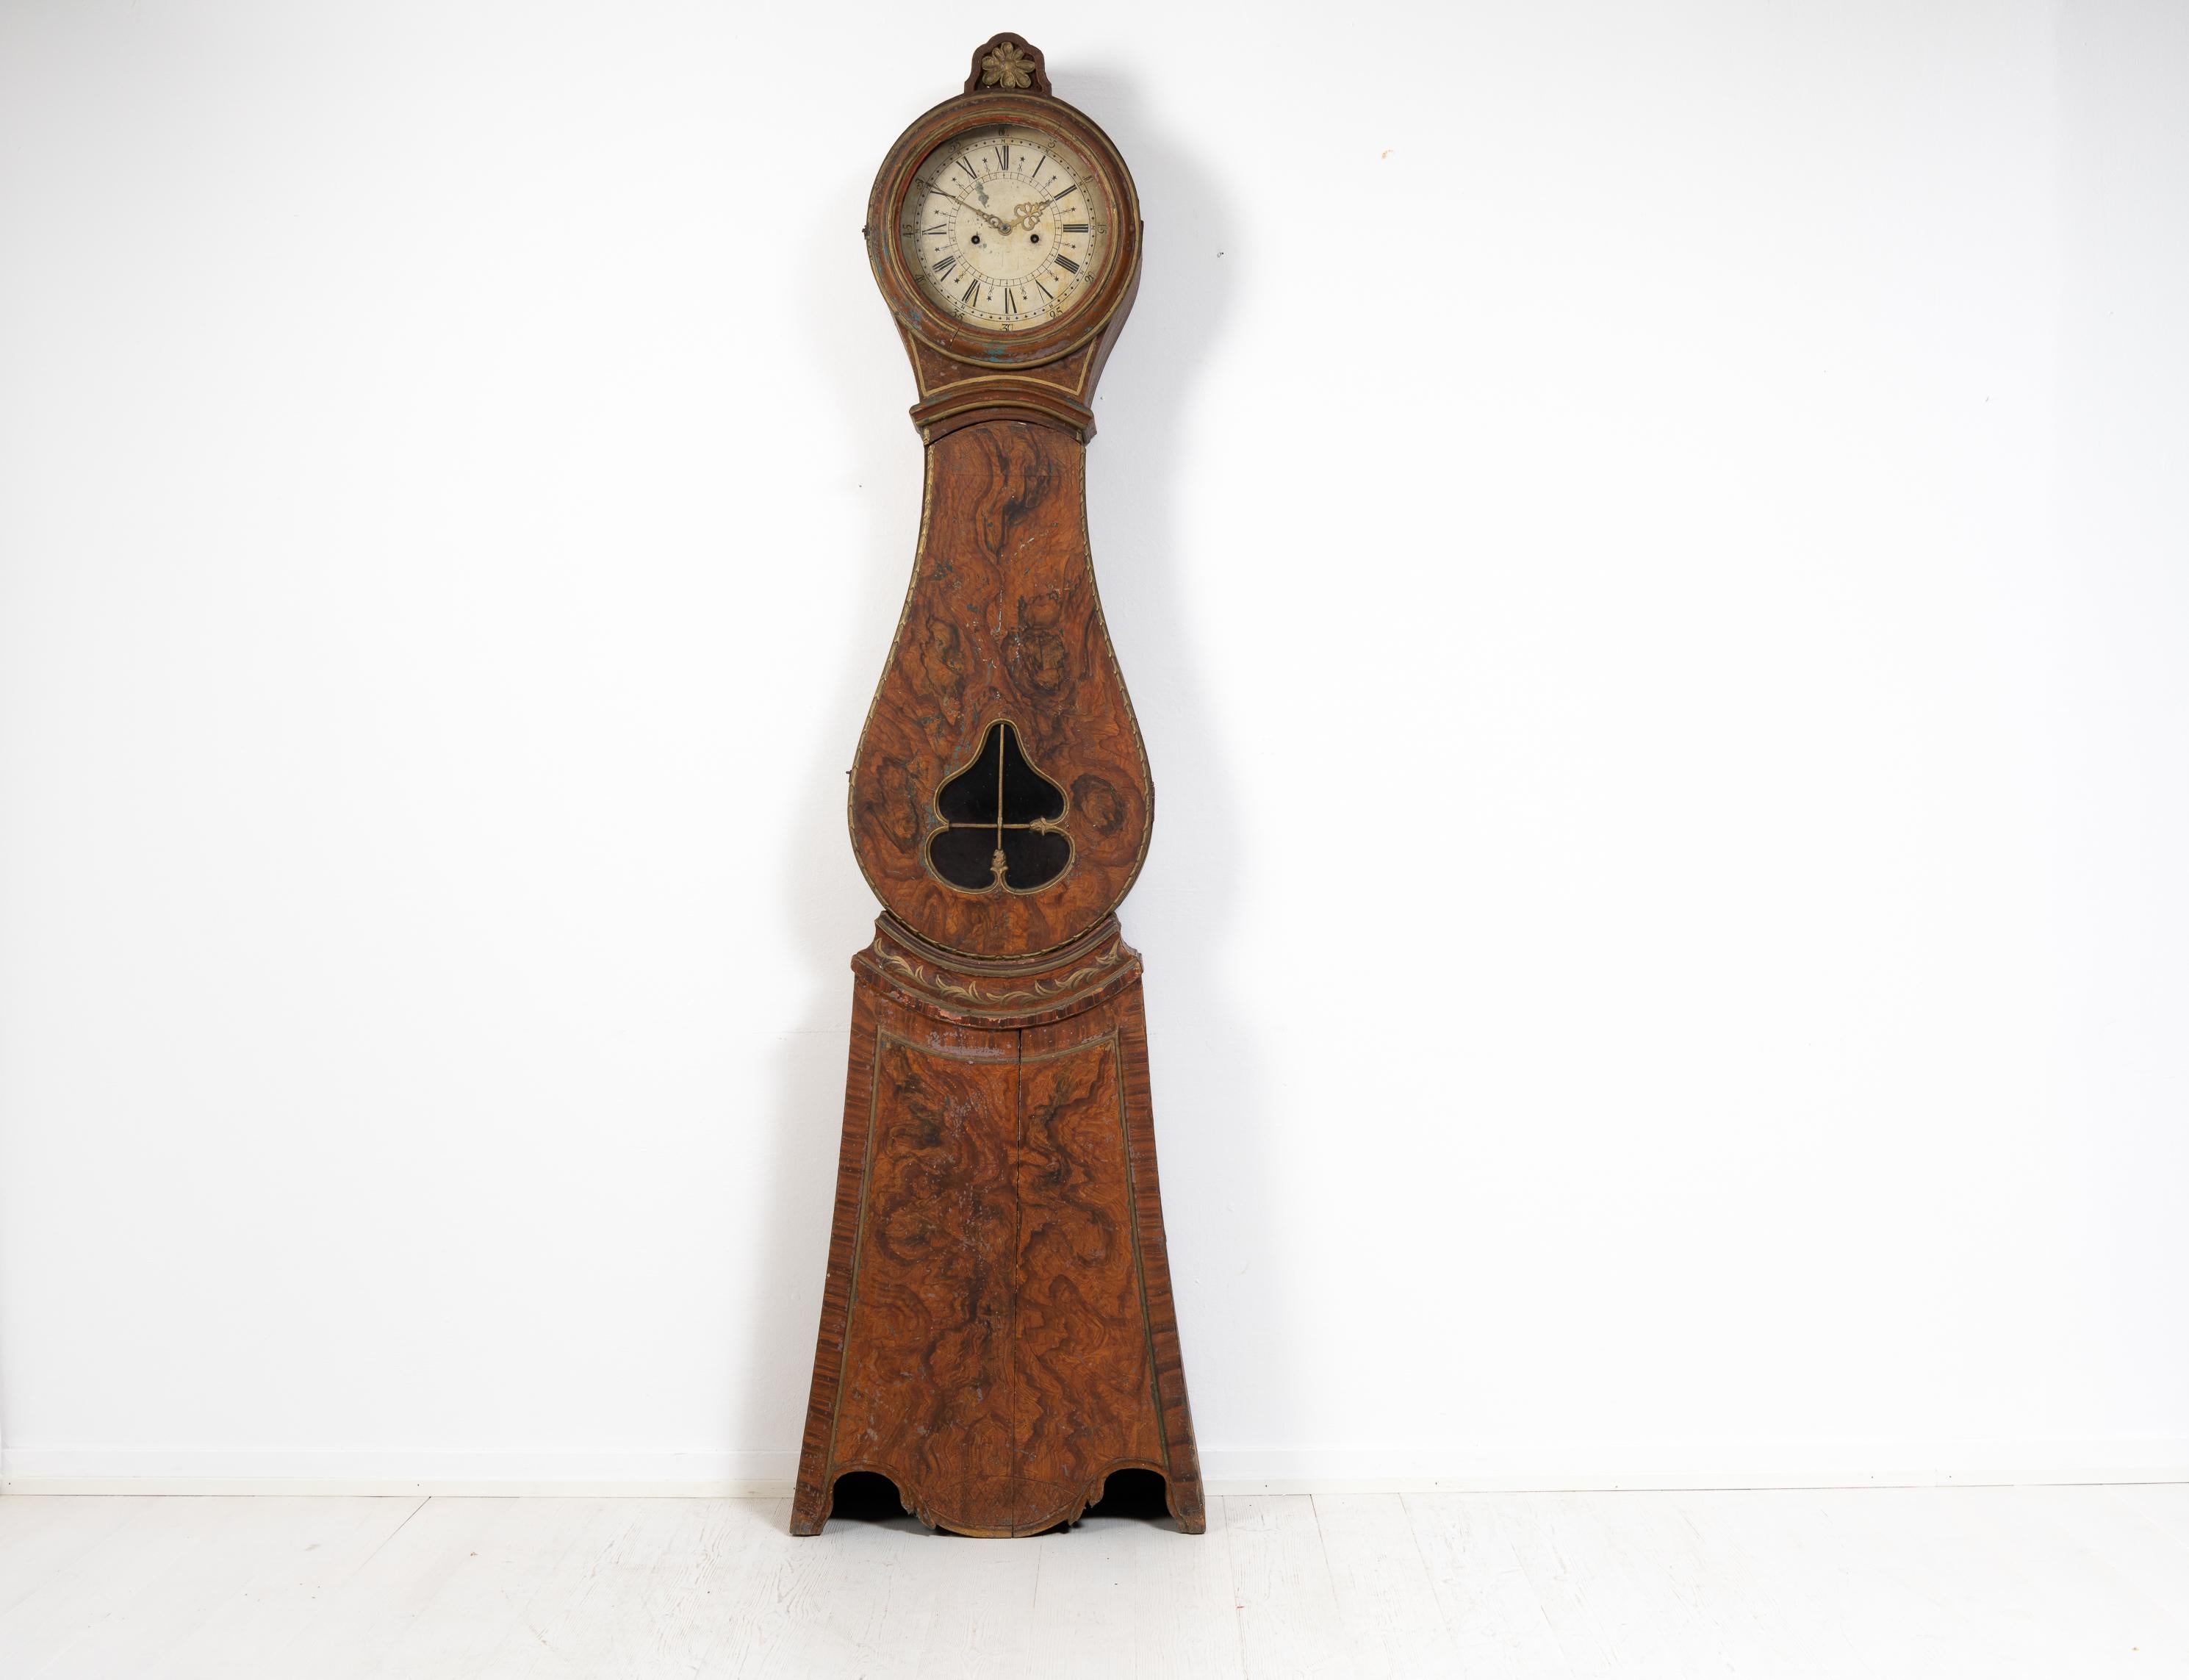 Genuine long case clock from Sweden made during the first years of the 19th century, around 1810. The clock is unusual and genuine, from the village Arbrå in Hälsingland which is located in mid Sweden. The clock is in untouched condition and has